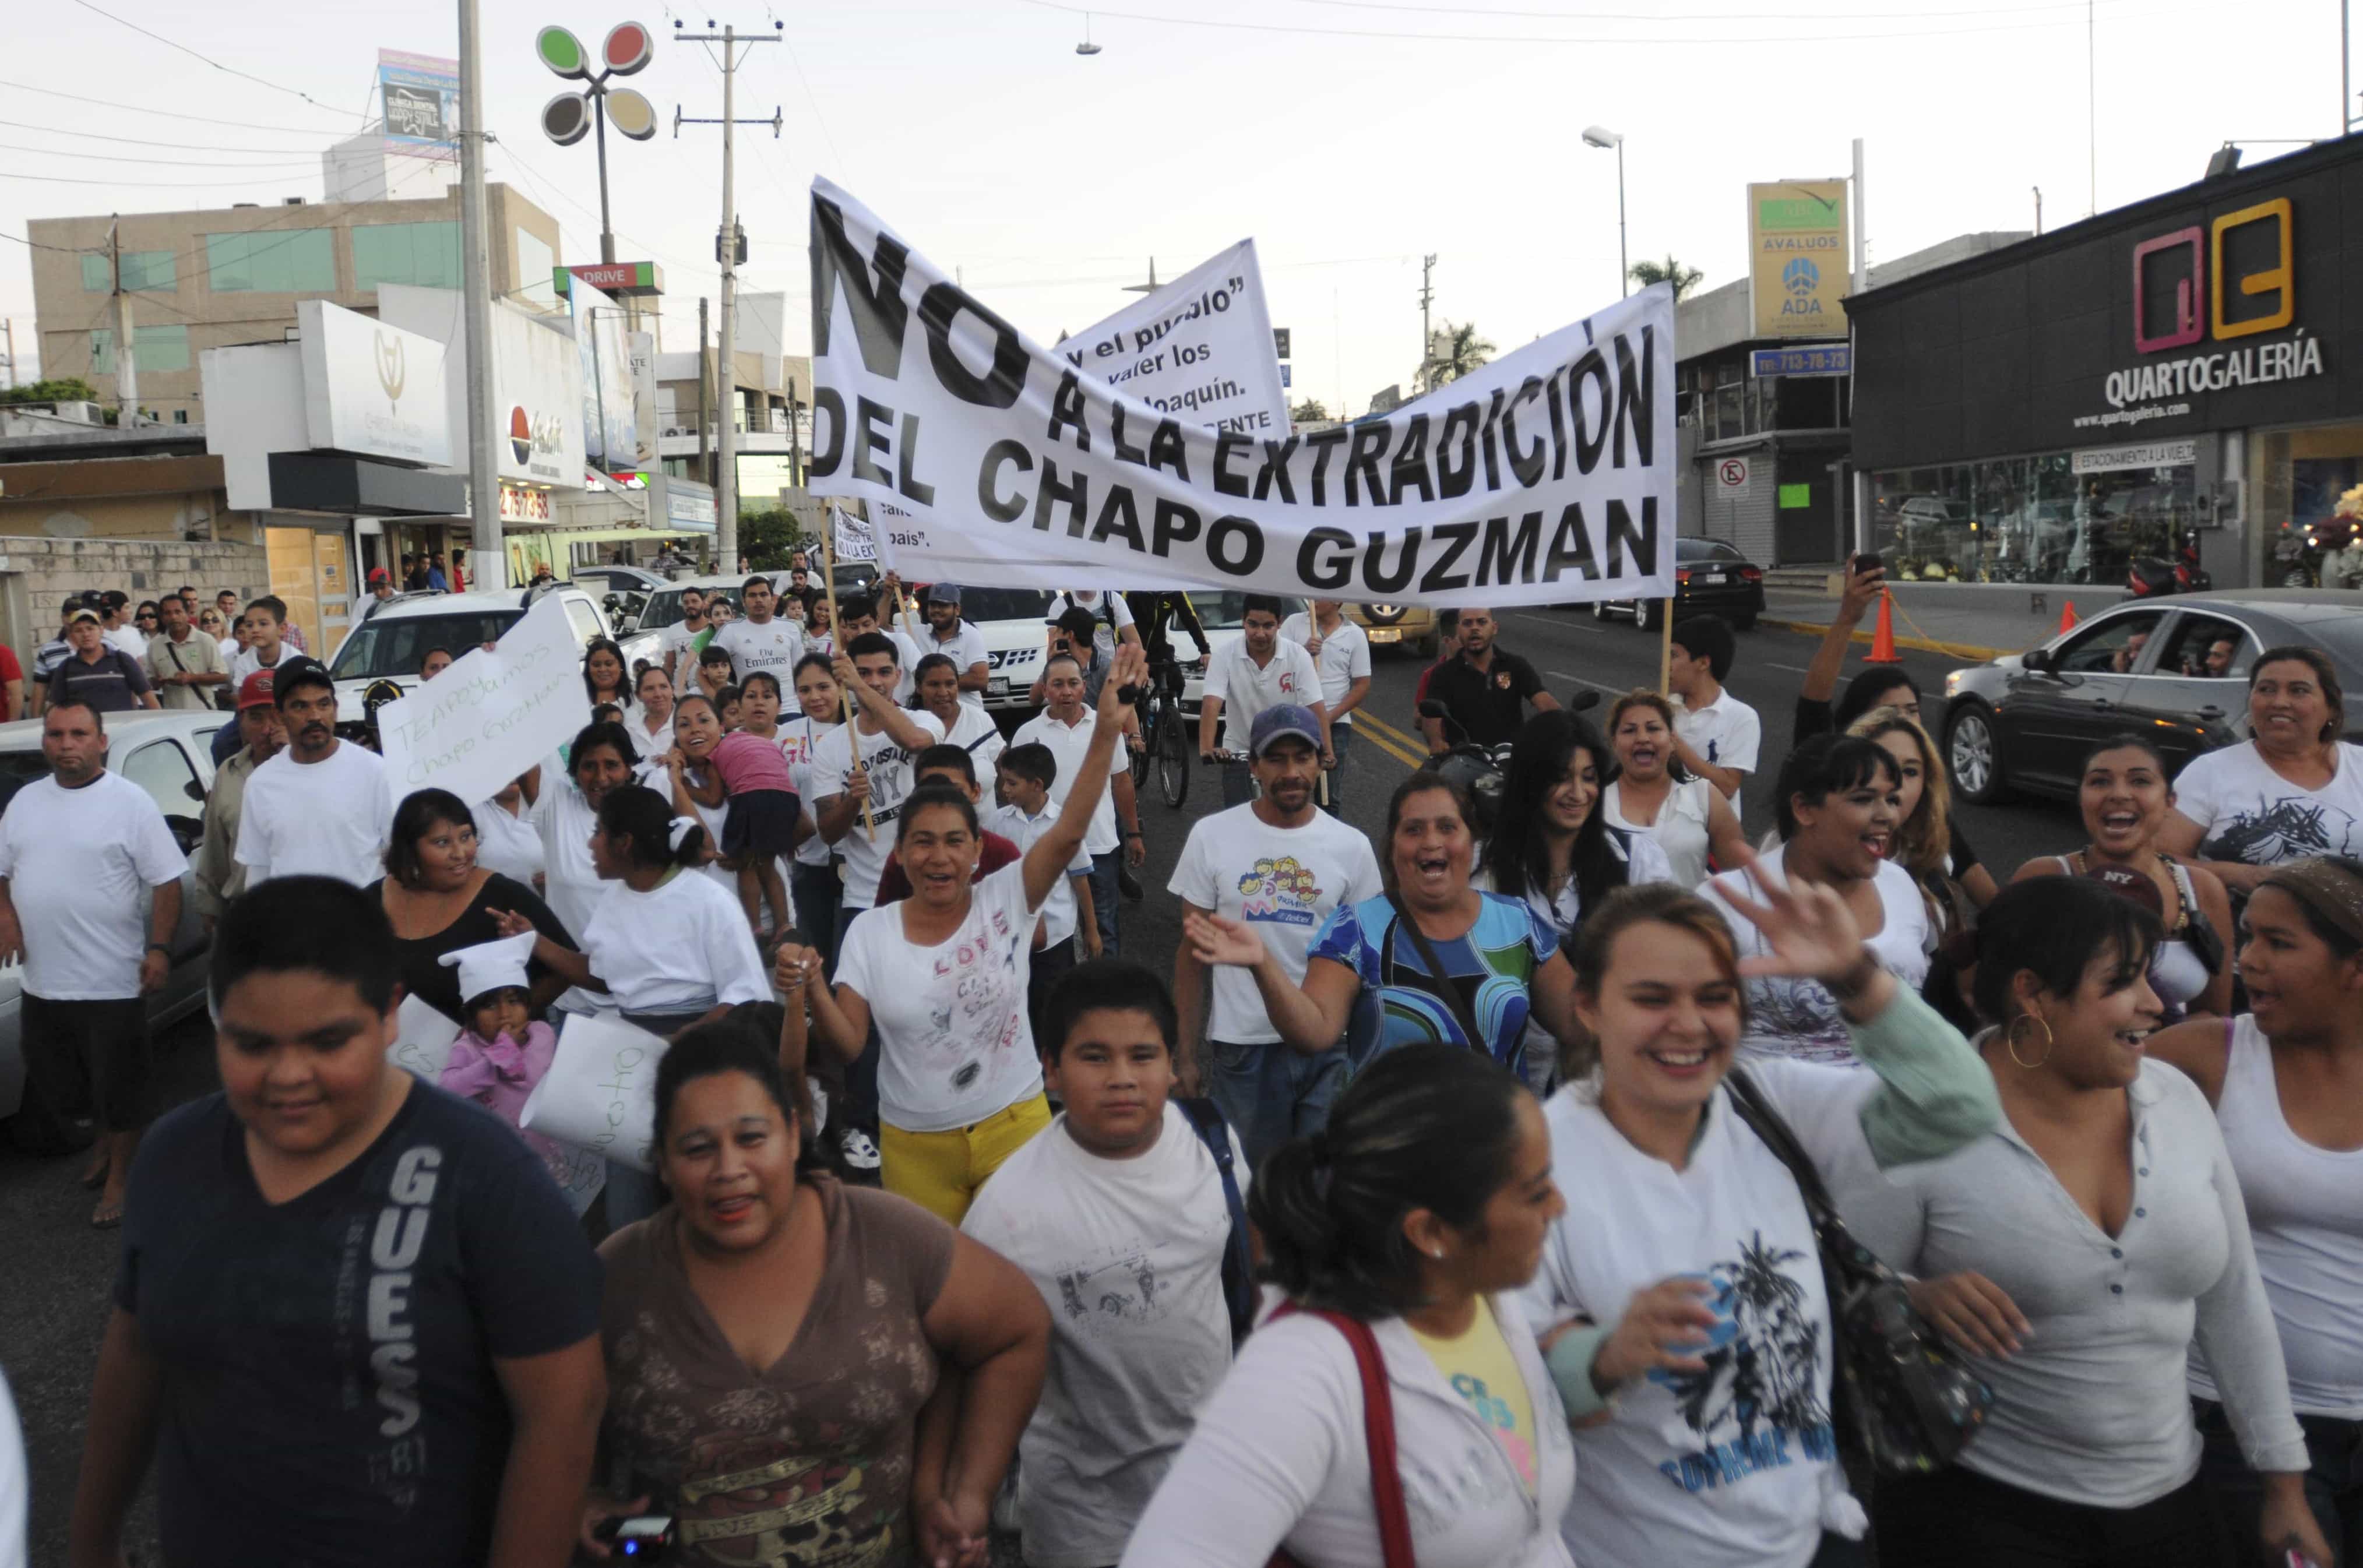 In this Feb. 26, 2014 file photo, people march in support of jailed drug boss Joaquin Guzman, "El Chapo" in the city of Culiacán, Mexico, AP Photo/El Debate de Culiacan, Jonathan Telles